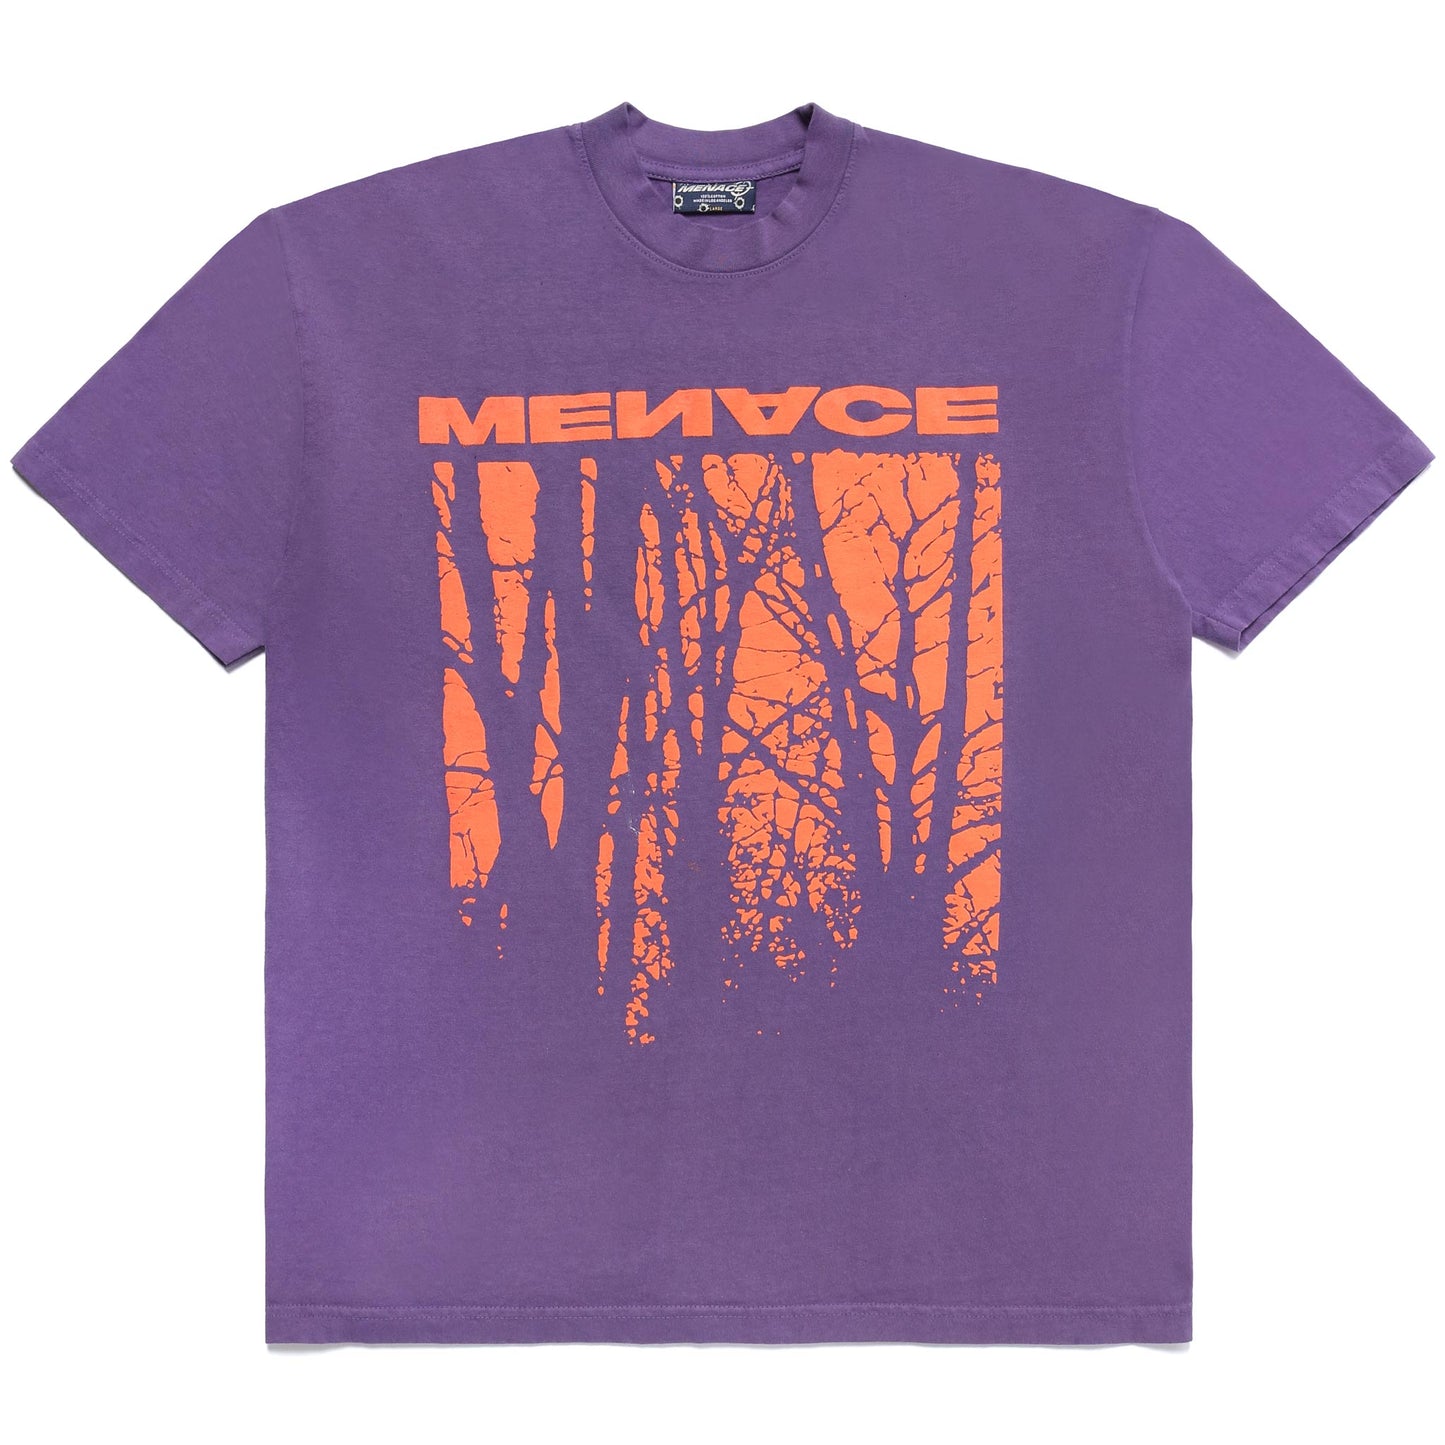 MY OWN HELL PUFF PRINT T-SHIRT by MENACE